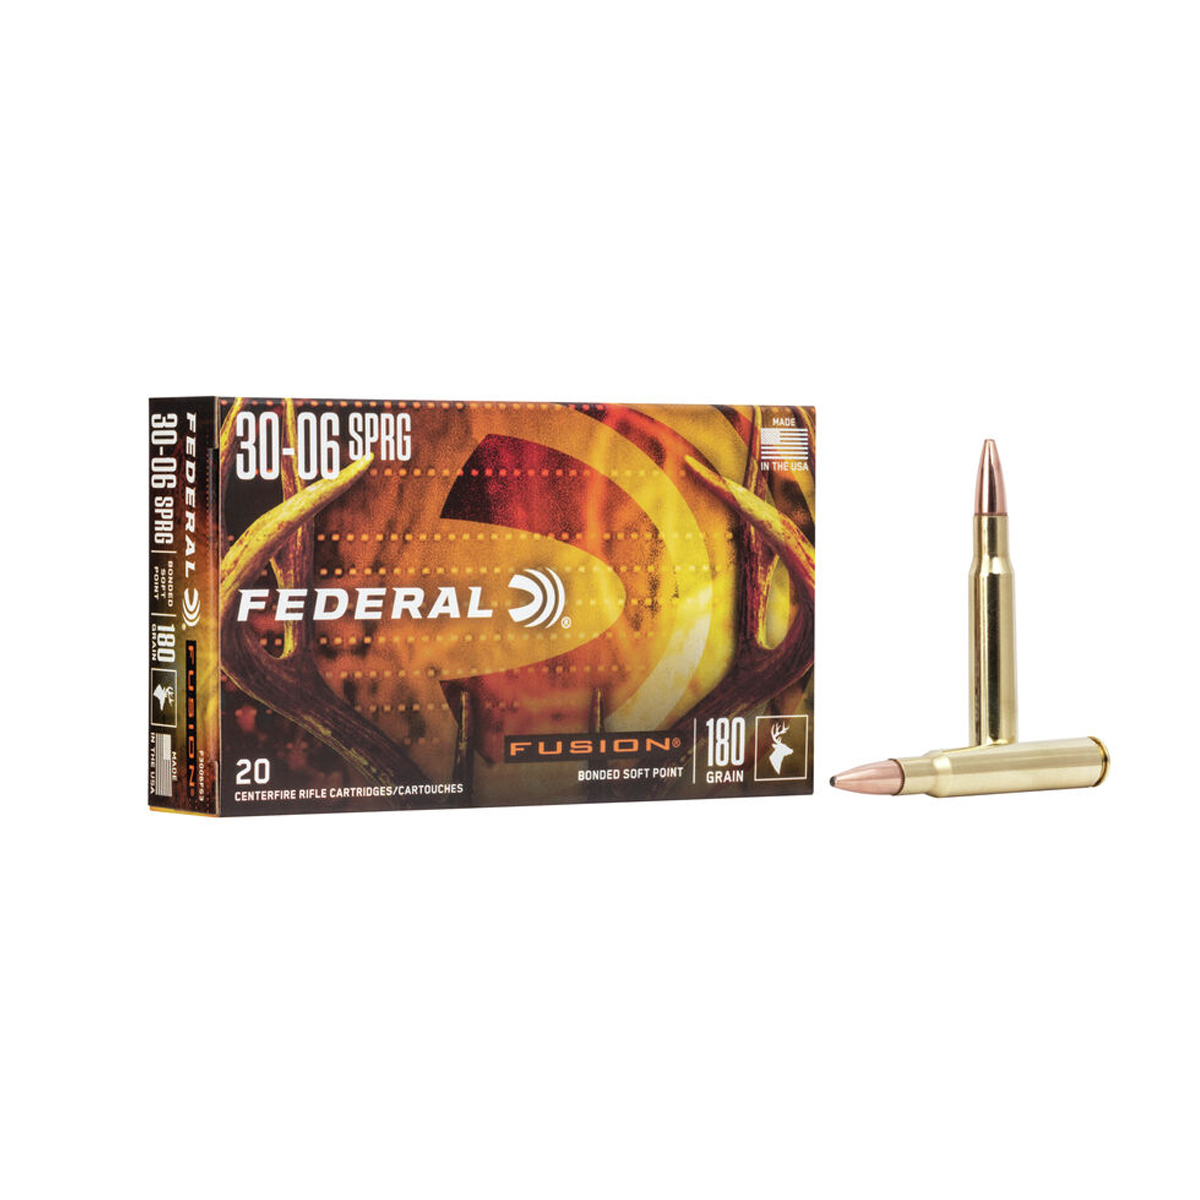 Federal Ammunition Fusion Cal.30-06 SPRG. – 20 Rounds